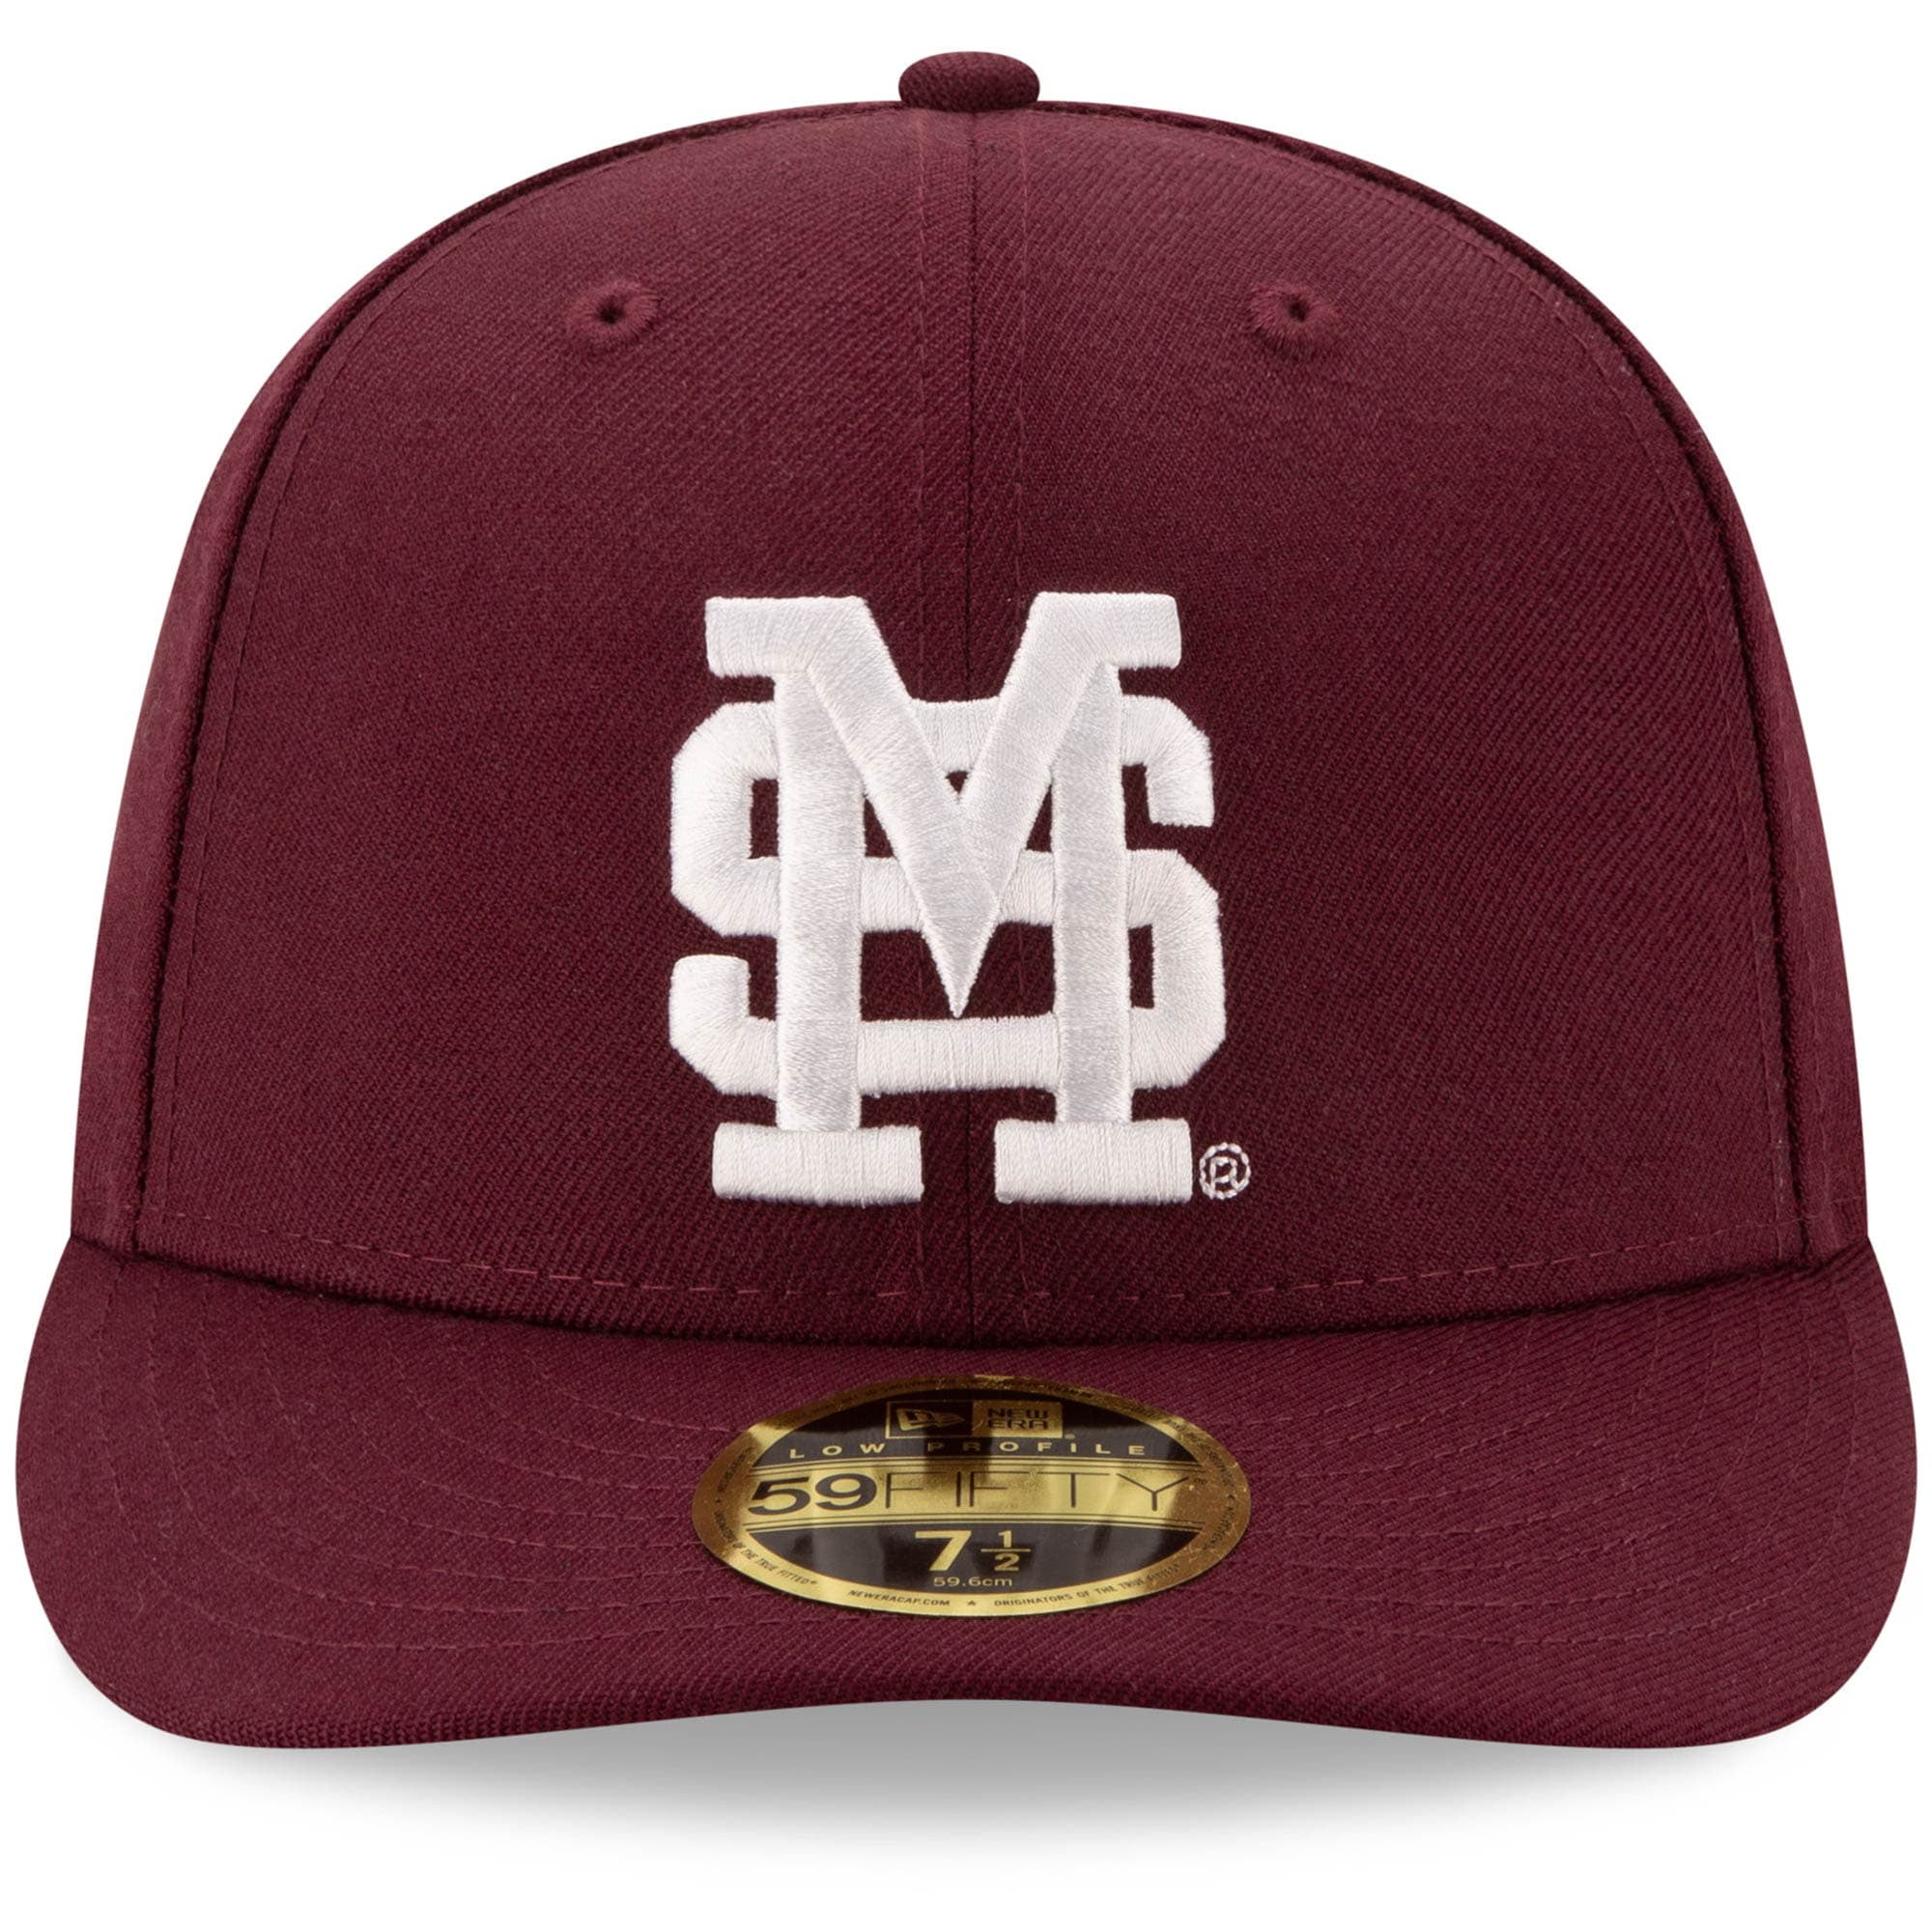 Mississippi State Bulldogs New Era Basic Low Profile 59FIFTY Fitted Hat -  Maroon